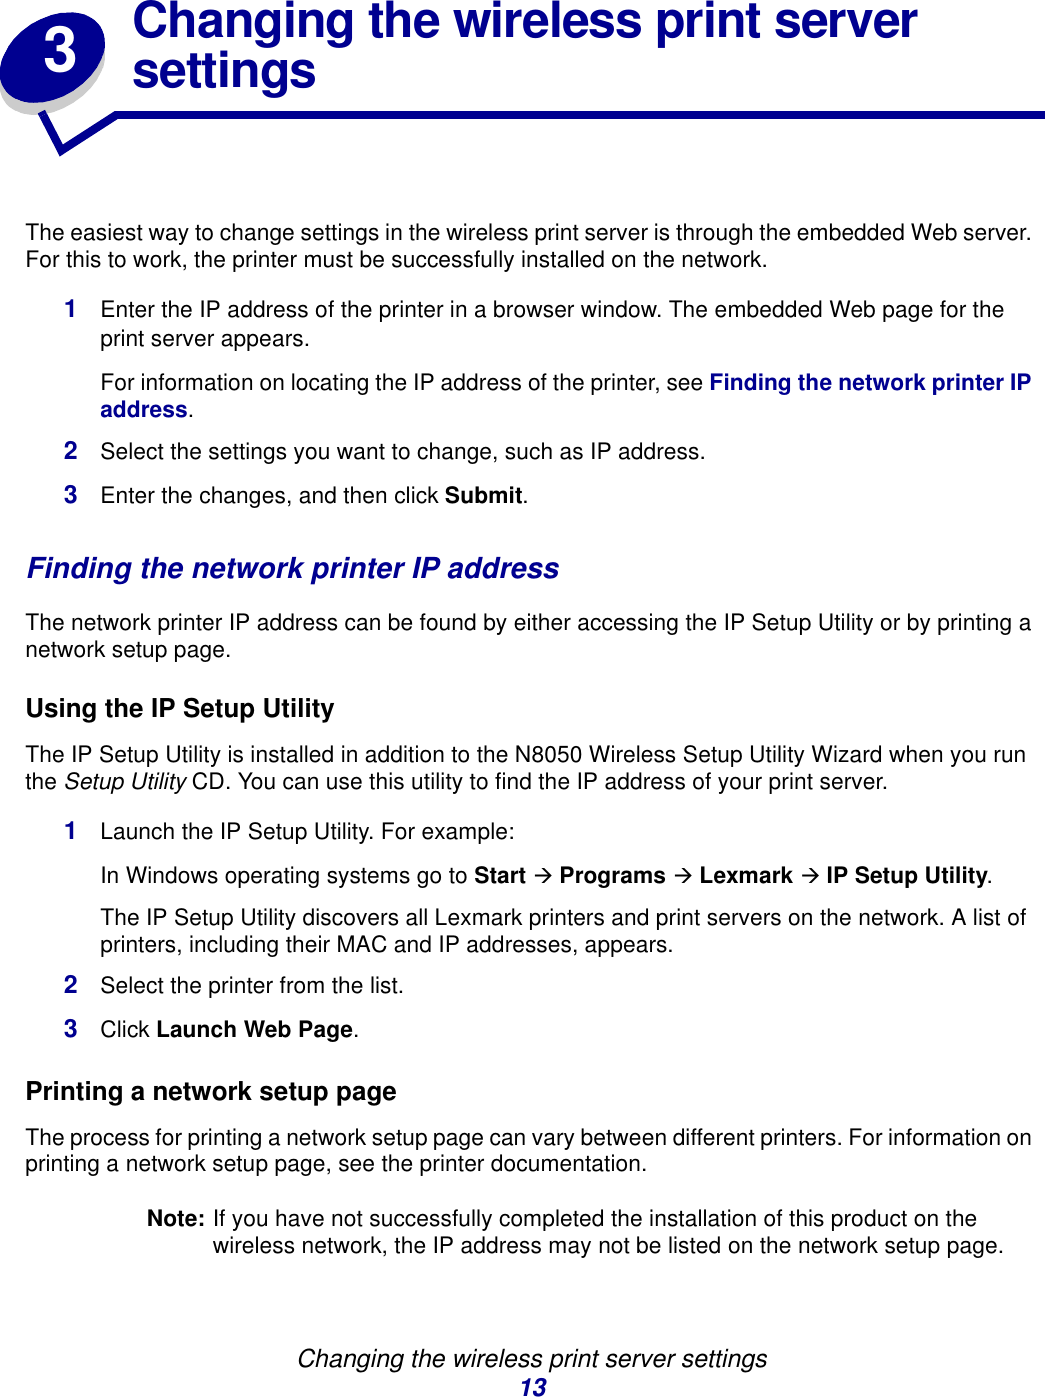 Changing the wireless print server settings133Changing the wireless print server settingsThe easiest way to change settings in the wireless print server is through the embedded Web server. For this to work, the printer must be successfully installed on the network. 1Enter the IP address of the printer in a browser window. The embedded Web page for the print server appears.For information on locating the IP address of the printer, see Finding the network printer IP address.2Select the settings you want to change, such as IP address.3Enter the changes, and then click Submit.Finding the network printer IP addressThe network printer IP address can be found by either accessing the IP Setup Utility or by printing a network setup page. Using the IP Setup UtilityThe IP Setup Utility is installed in addition to the N8050 Wireless Setup Utility Wizard when you run the Setup Utility CD. You can use this utility to find the IP address of your print server. 1Launch the IP Setup Utility. For example: In Windows operating systems go to Start Æ Programs Æ Lexmark Æ IP Setup Utility.The IP Setup Utility discovers all Lexmark printers and print servers on the network. A list of printers, including their MAC and IP addresses, appears. 2Select the printer from the list.3Click Launch Web Page.Printing a network setup page The process for printing a network setup page can vary between different printers. For information on printing a network setup page, see the printer documentation. Note: If you have not successfully completed the installation of this product on the wireless network, the IP address may not be listed on the network setup page. 